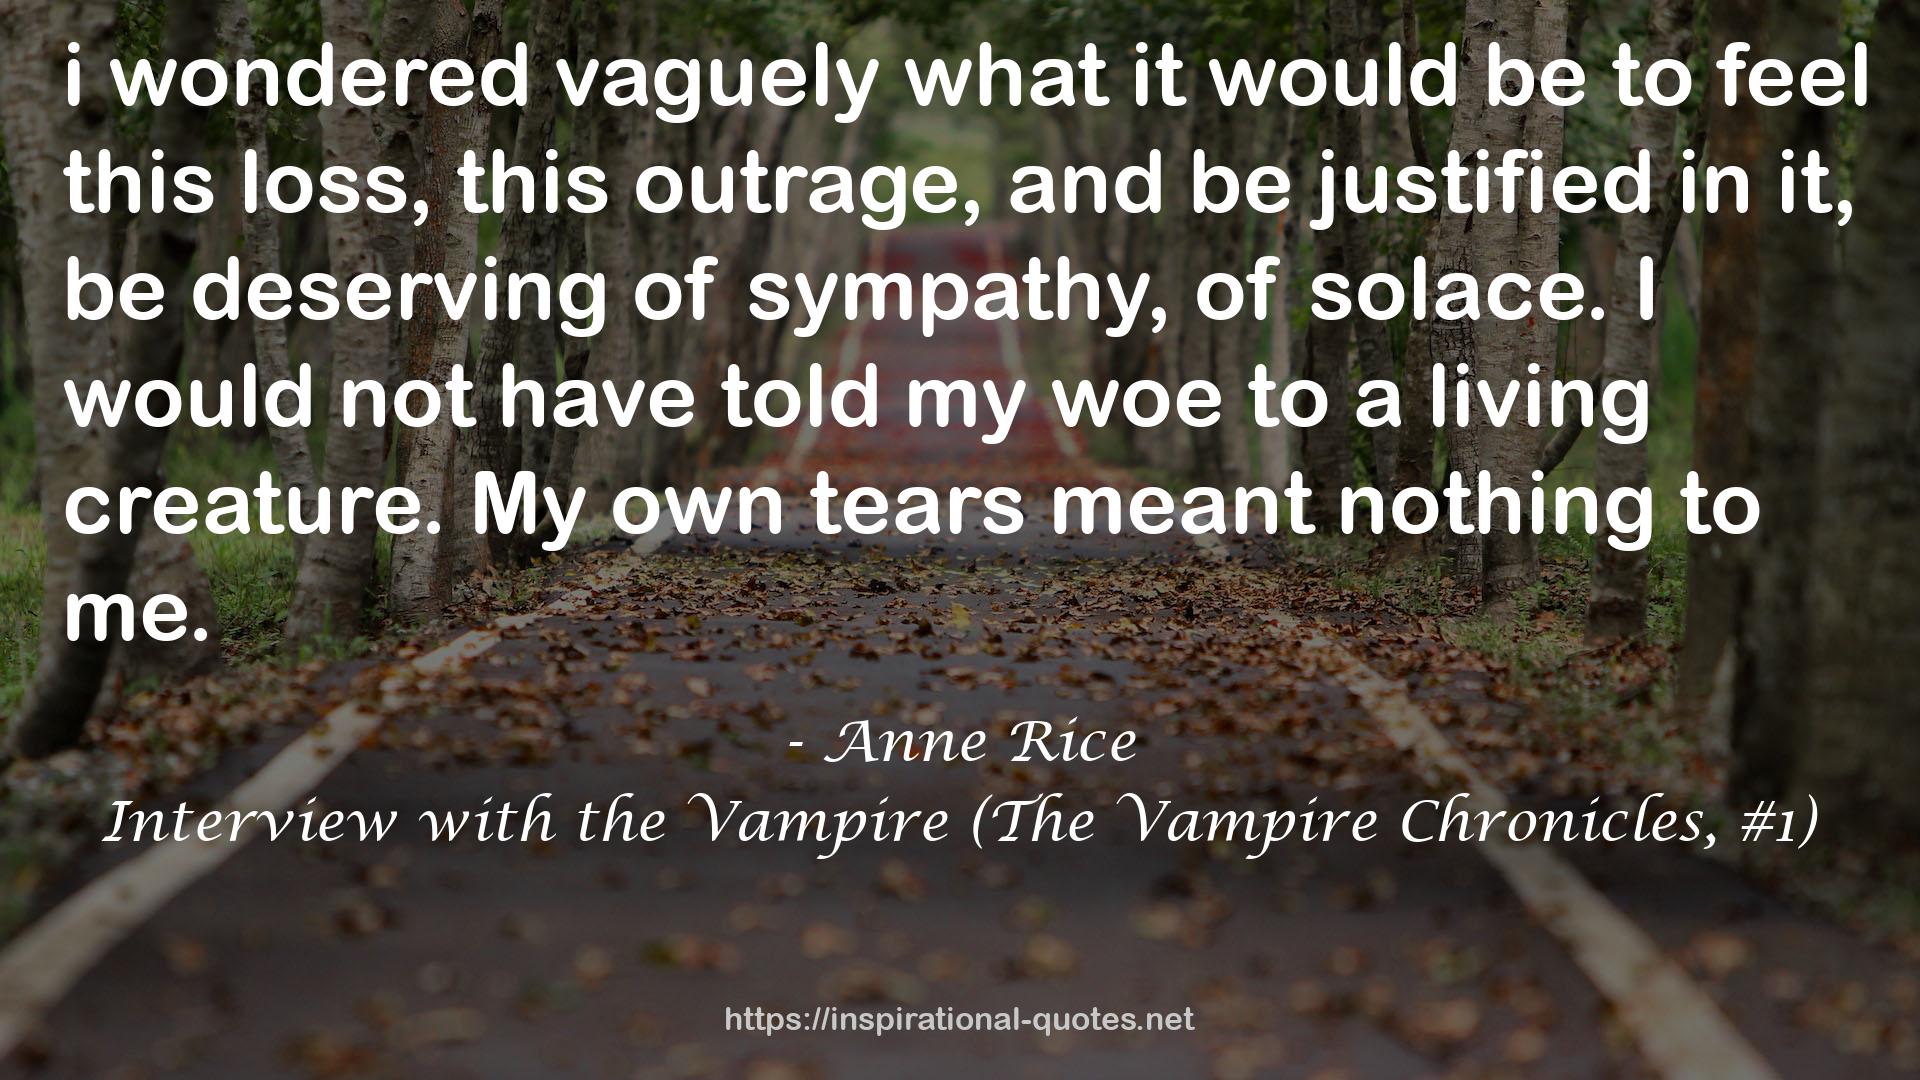 Interview with the Vampire (The Vampire Chronicles, #1) QUOTES